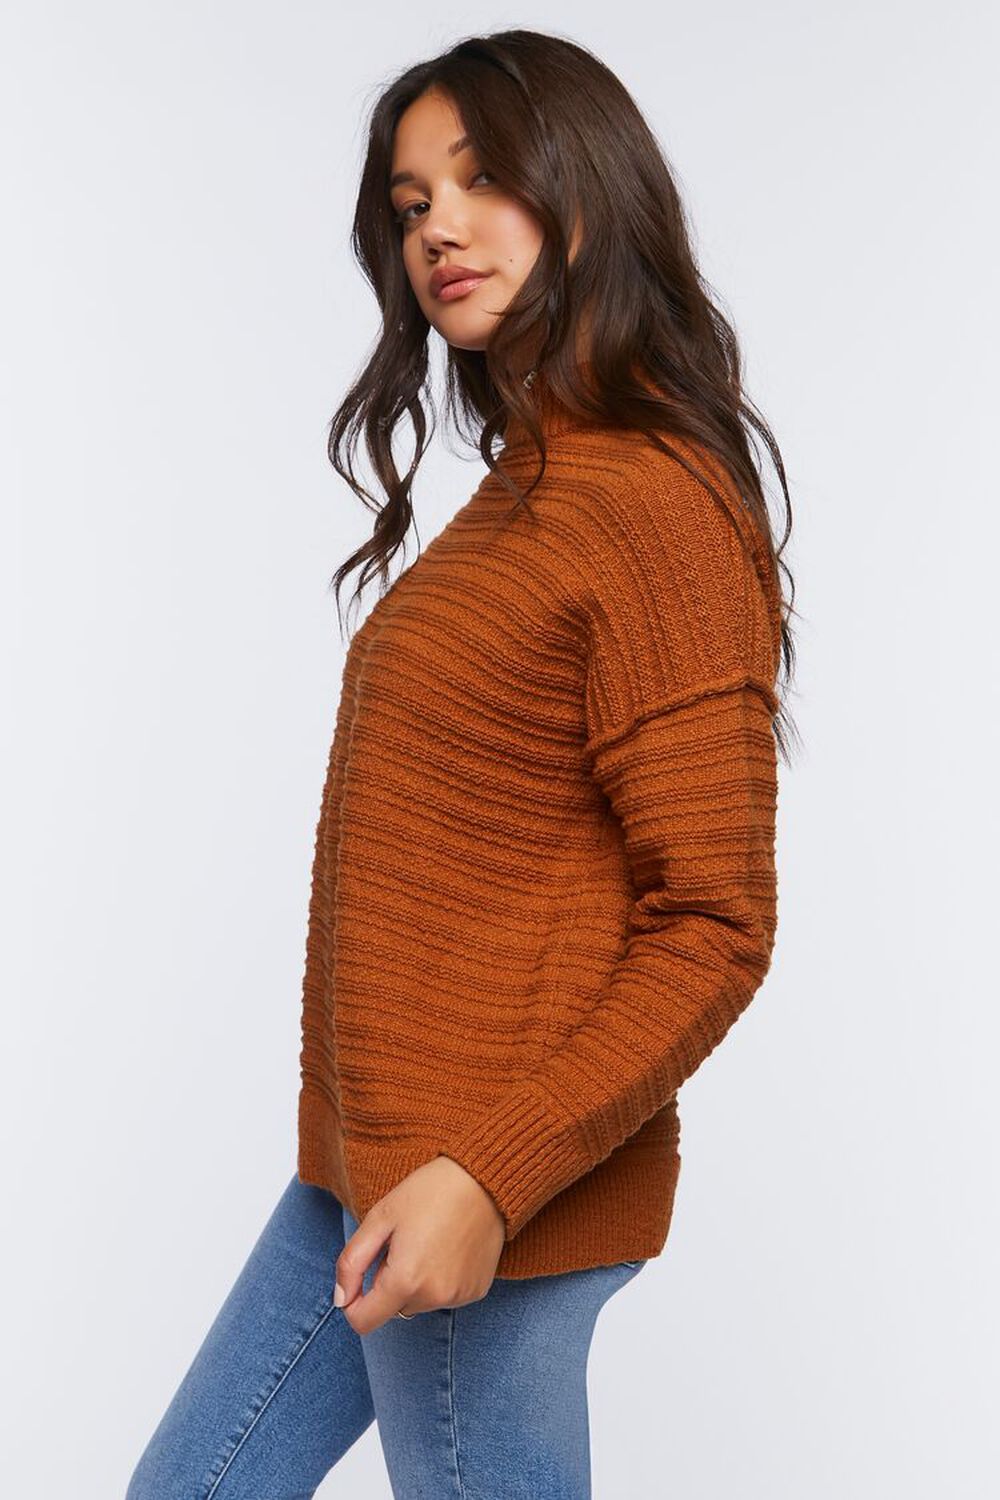 GINGER Ribbed Mock Neck Sweater Top, image 2